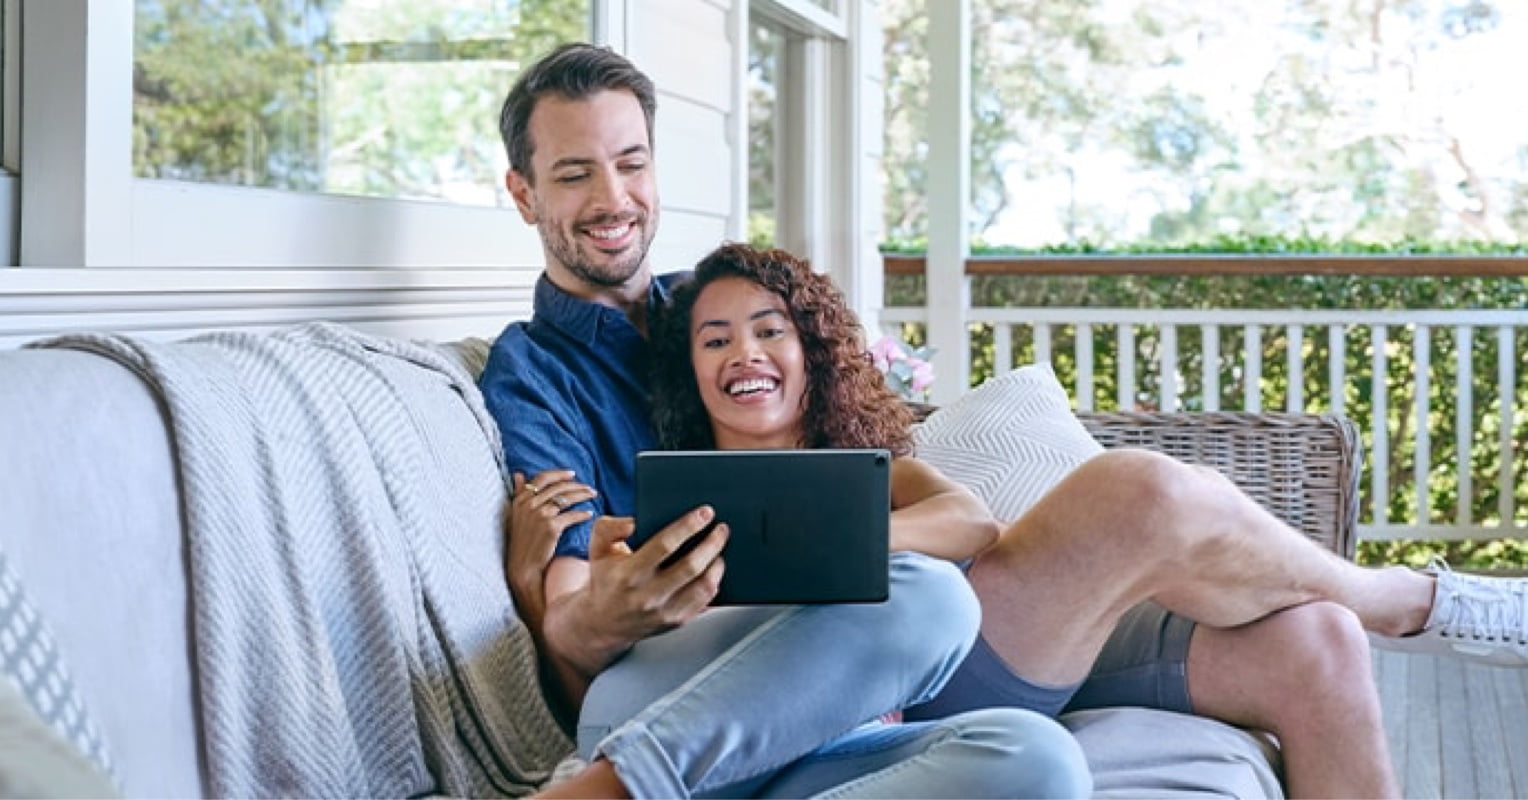 Man and woman sitting outside engaging with a tablet device